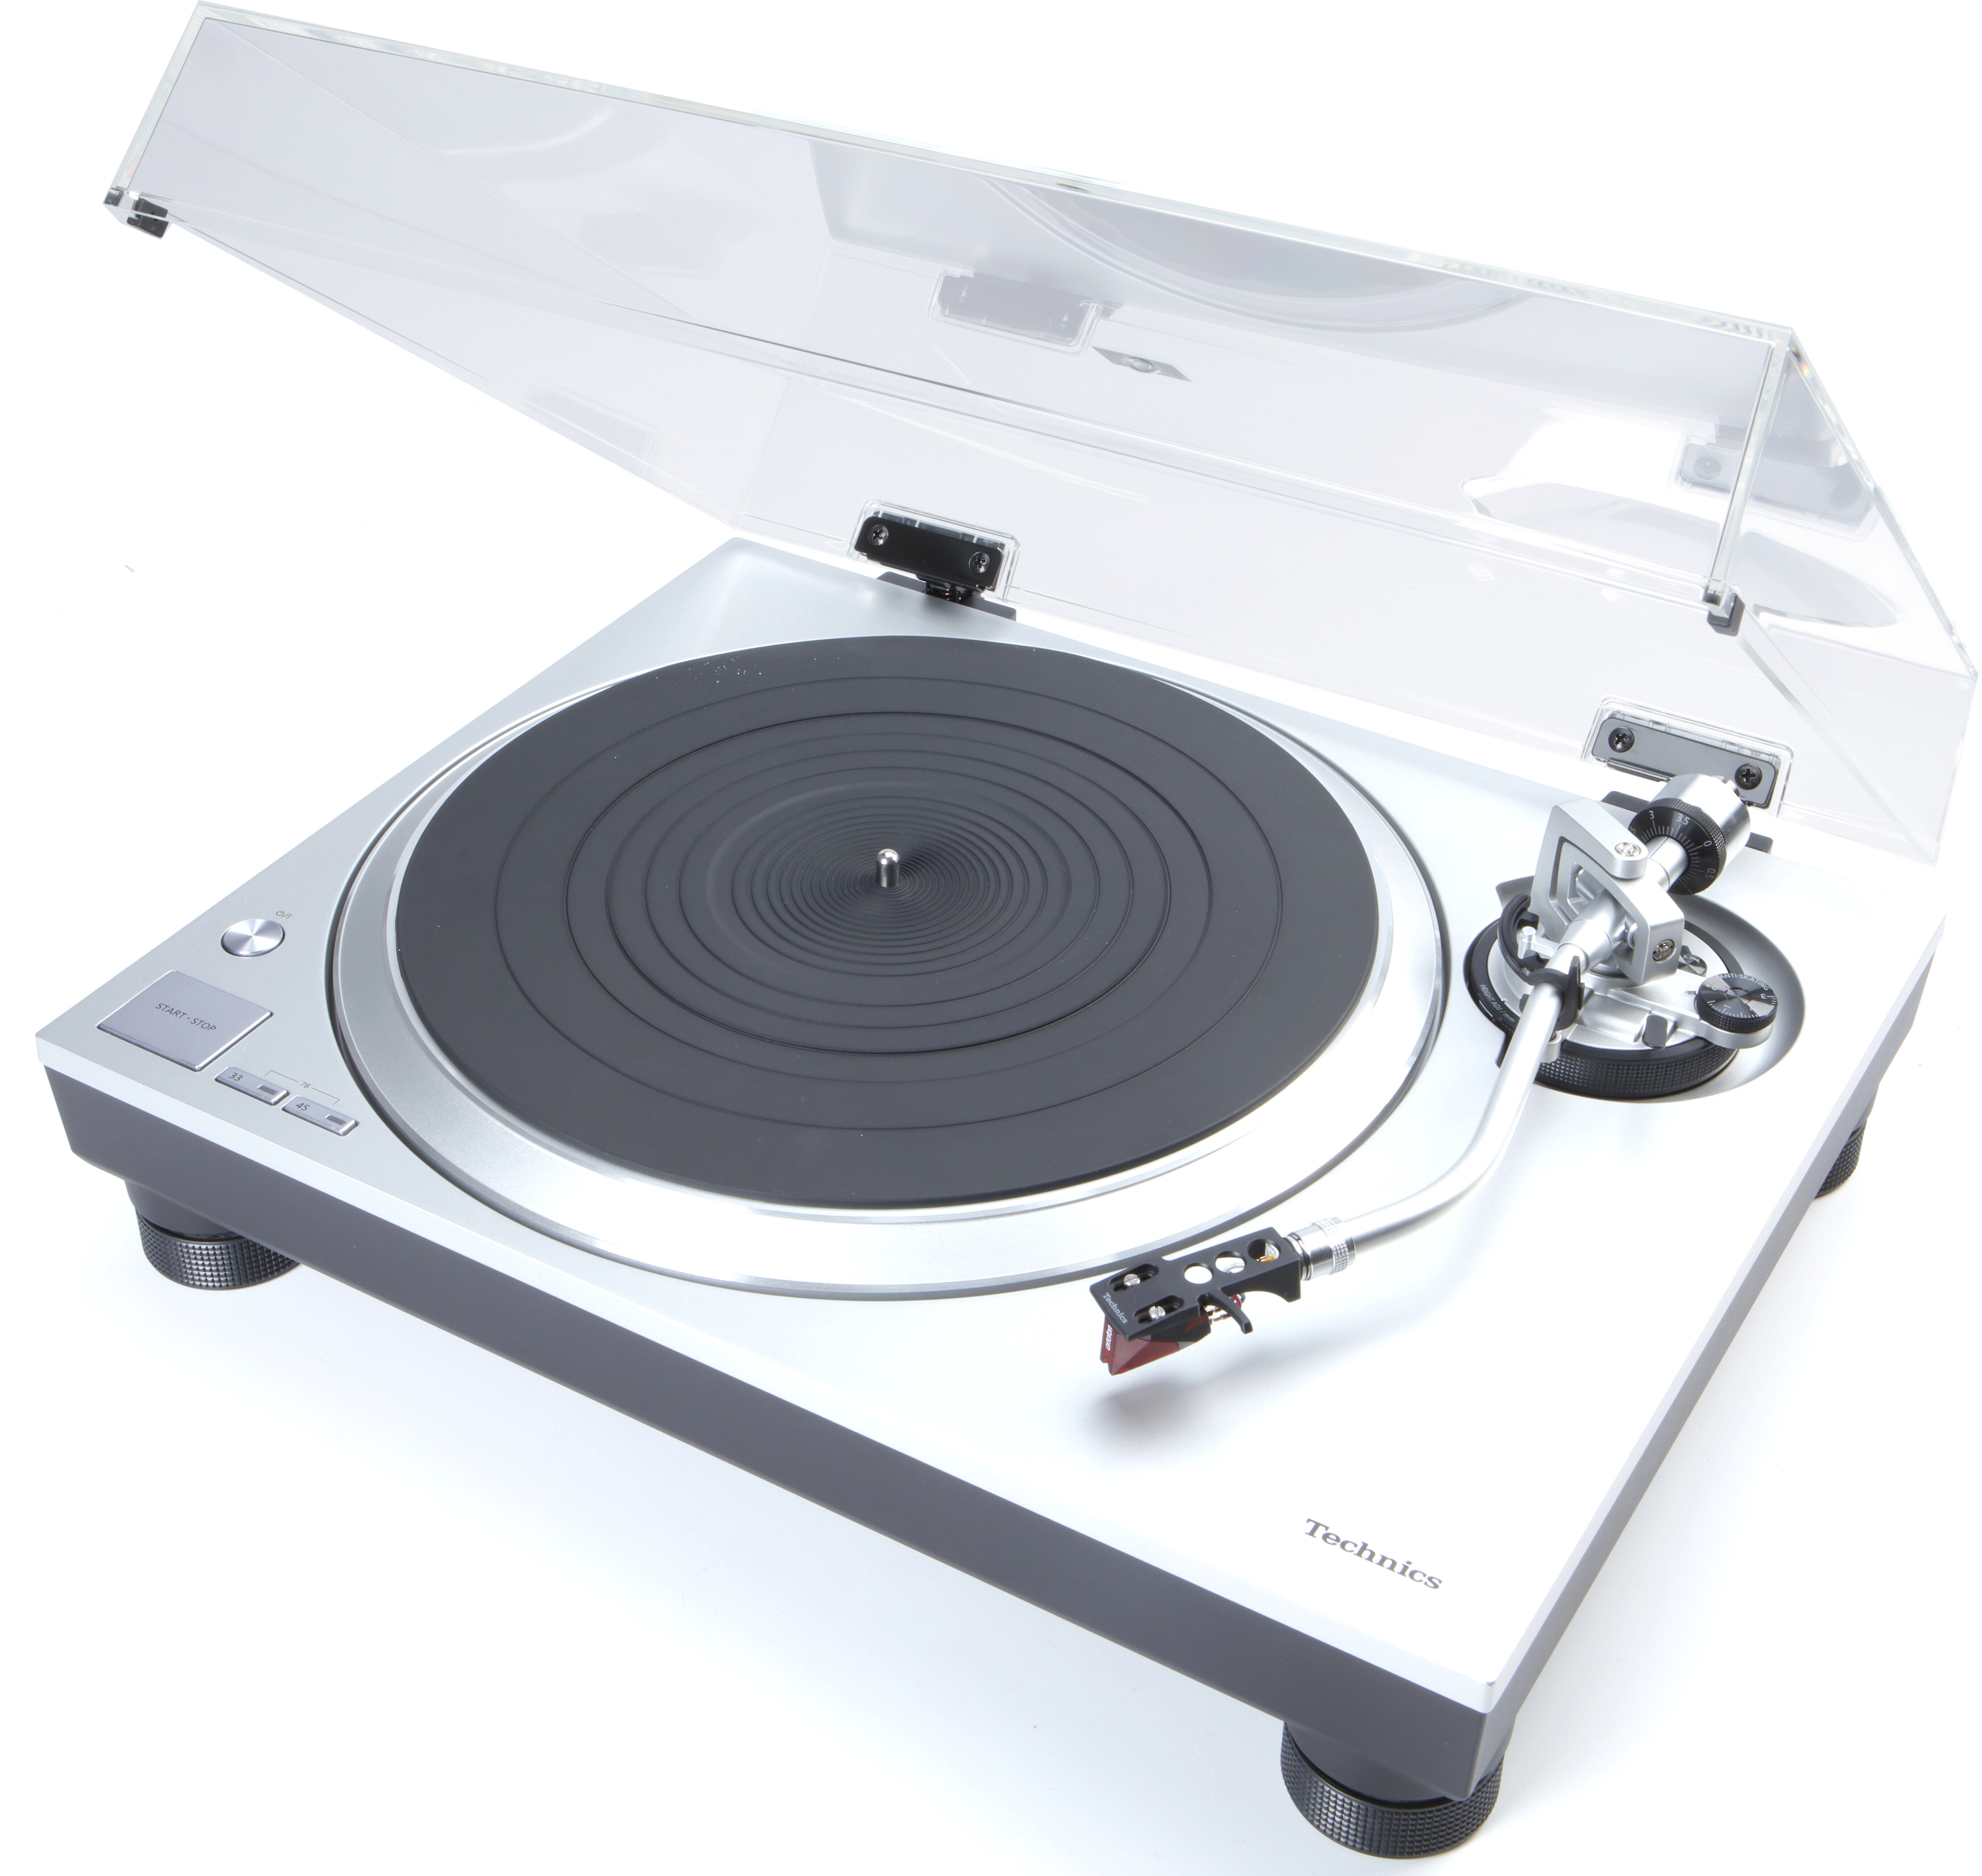 Customer Reviews Technics Sl 1500c Silver Semi Automatic Direct Drive Turntable With Built In Phono Preamp At Crutchfield